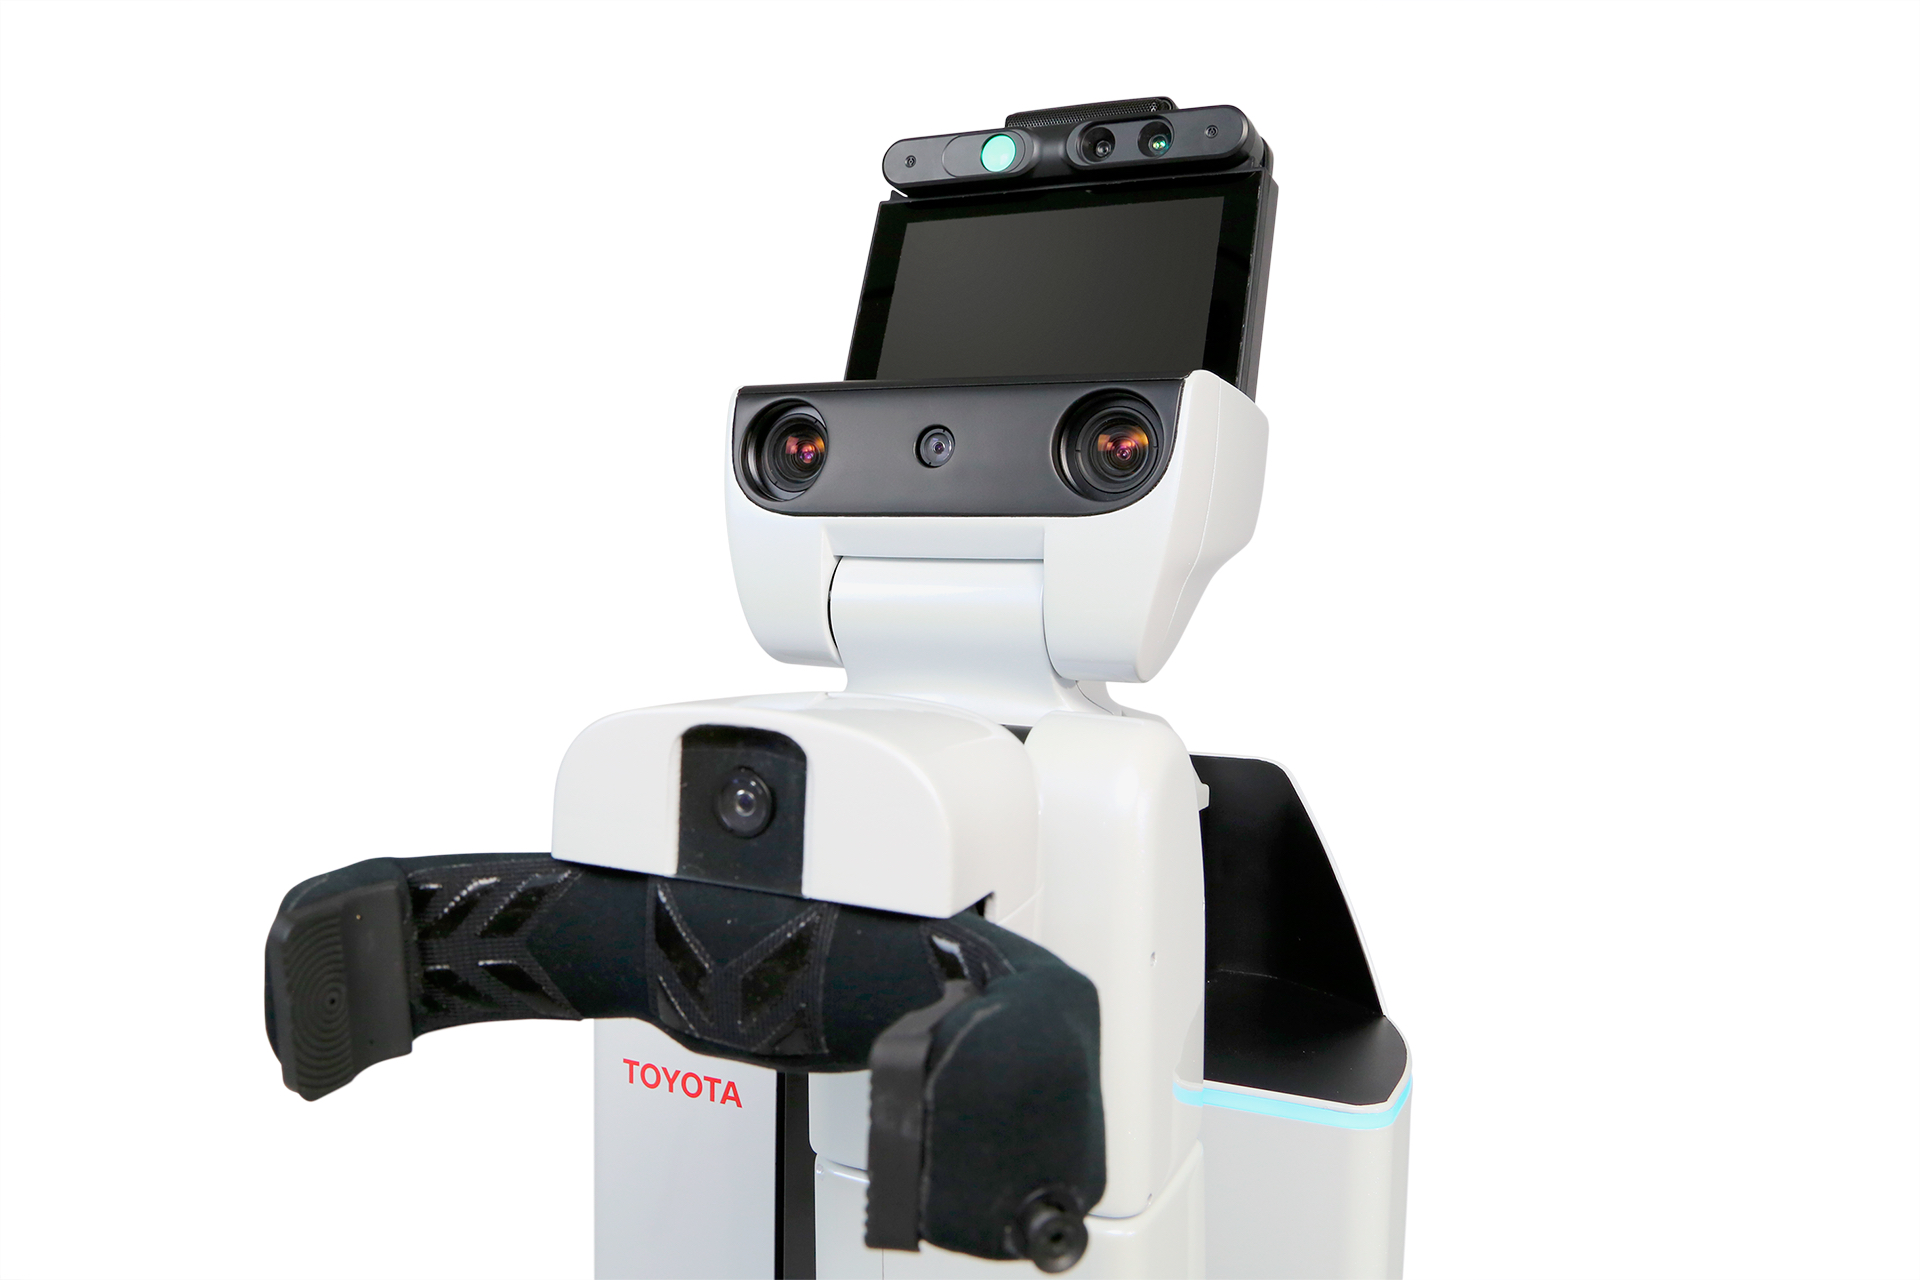 The Toyota HSR personal care robot, with close up of pinchers and display screen